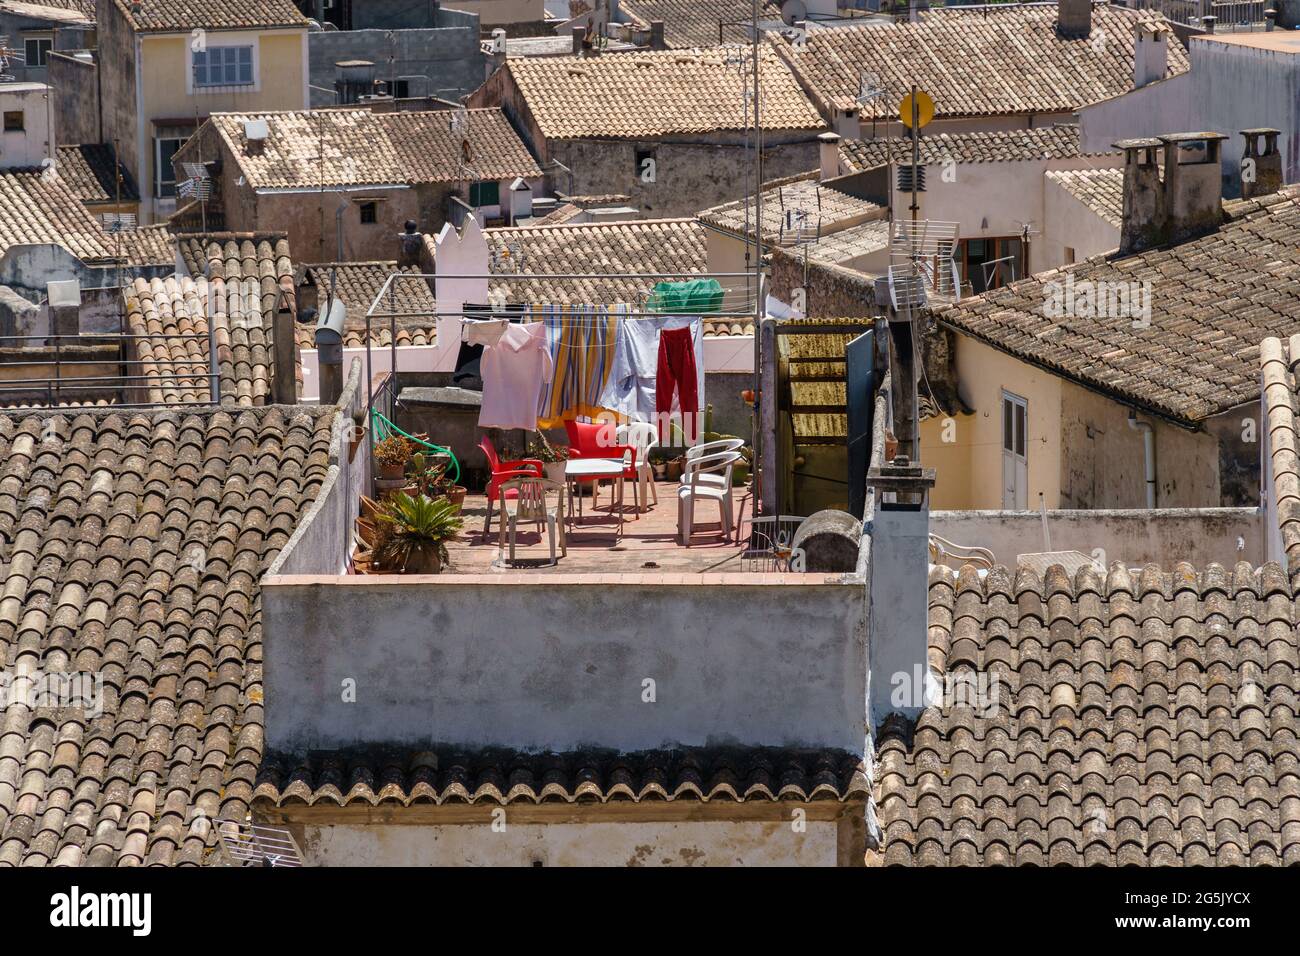 Drying clothes on a clothesline outdoors. Houses with traditional roof tiles in the beautiful old town in Arta, Majorca, Spain. Mediterranean culture. Stock Photo